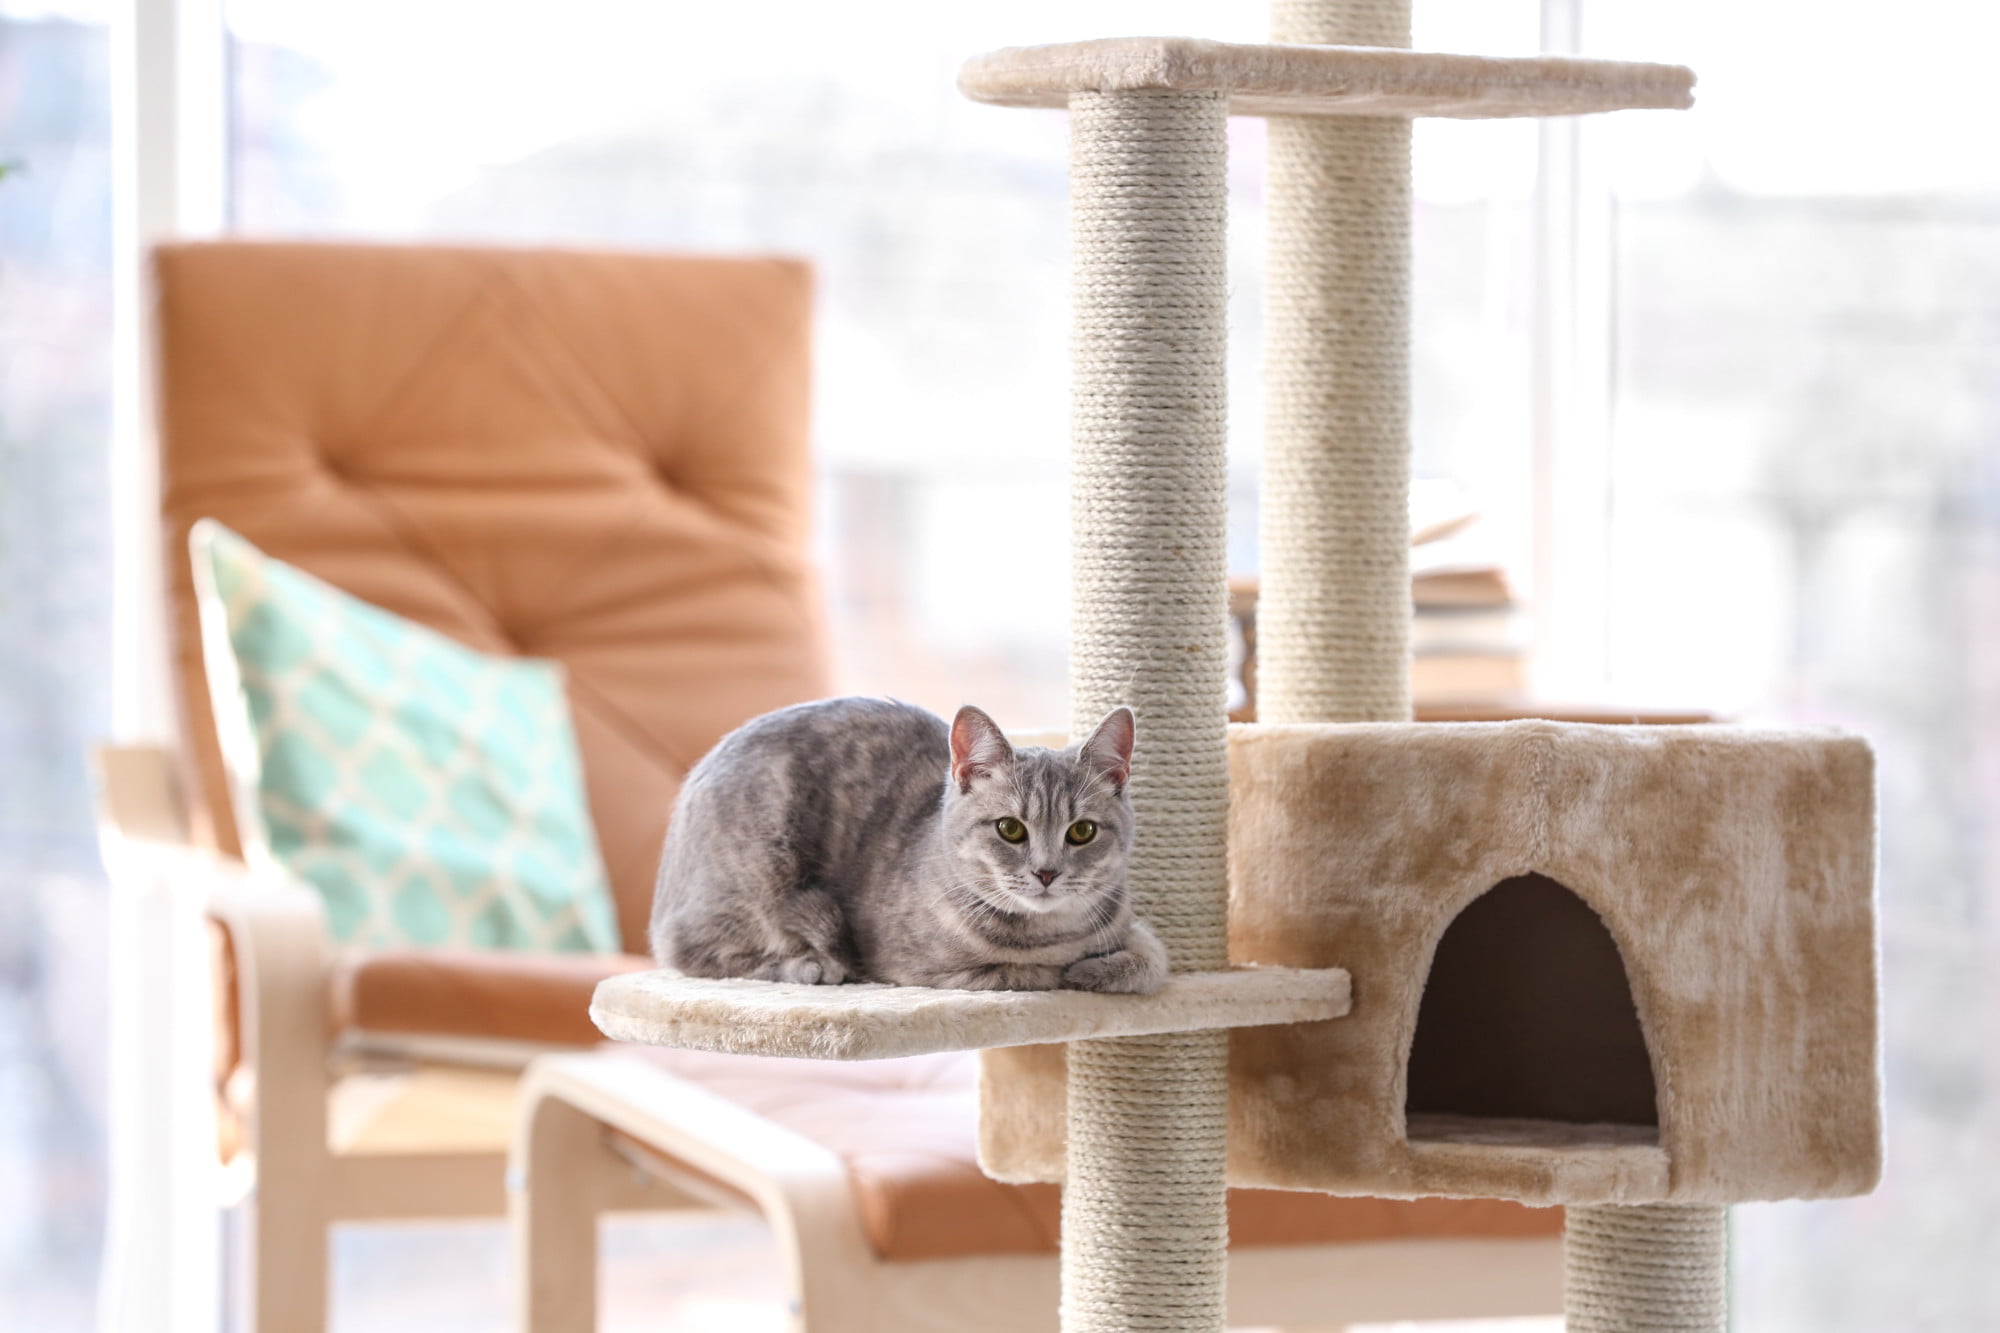 There are pets for everyone, even homebodies. Discover the best indoor pets that bring joy and companionship to your home.